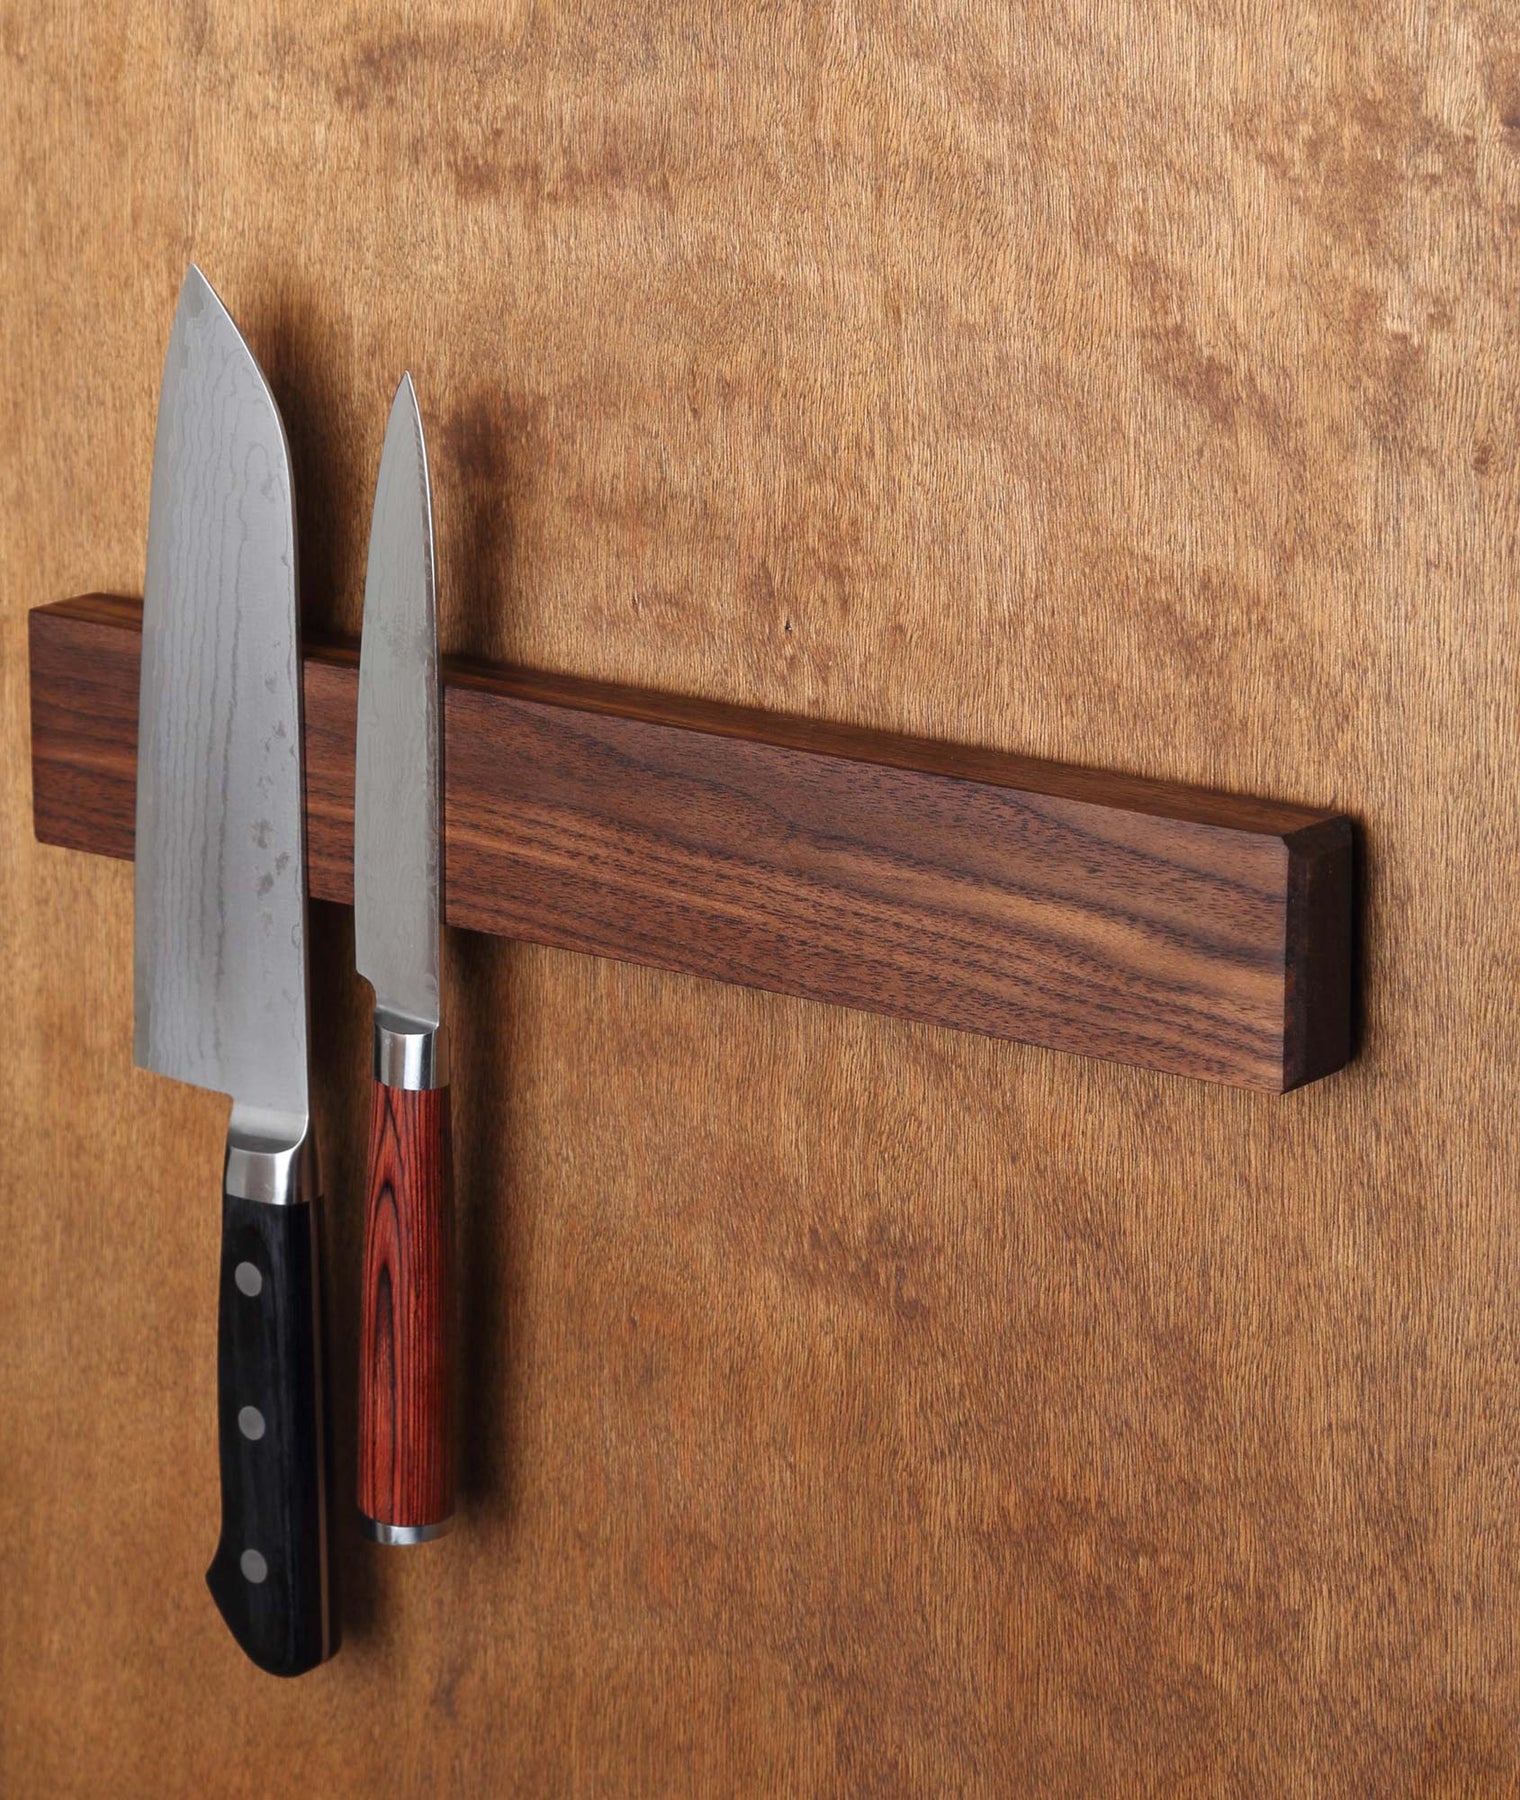 Adhesive Magnetic Knife Holder (No Drill) for Wall - Size 17